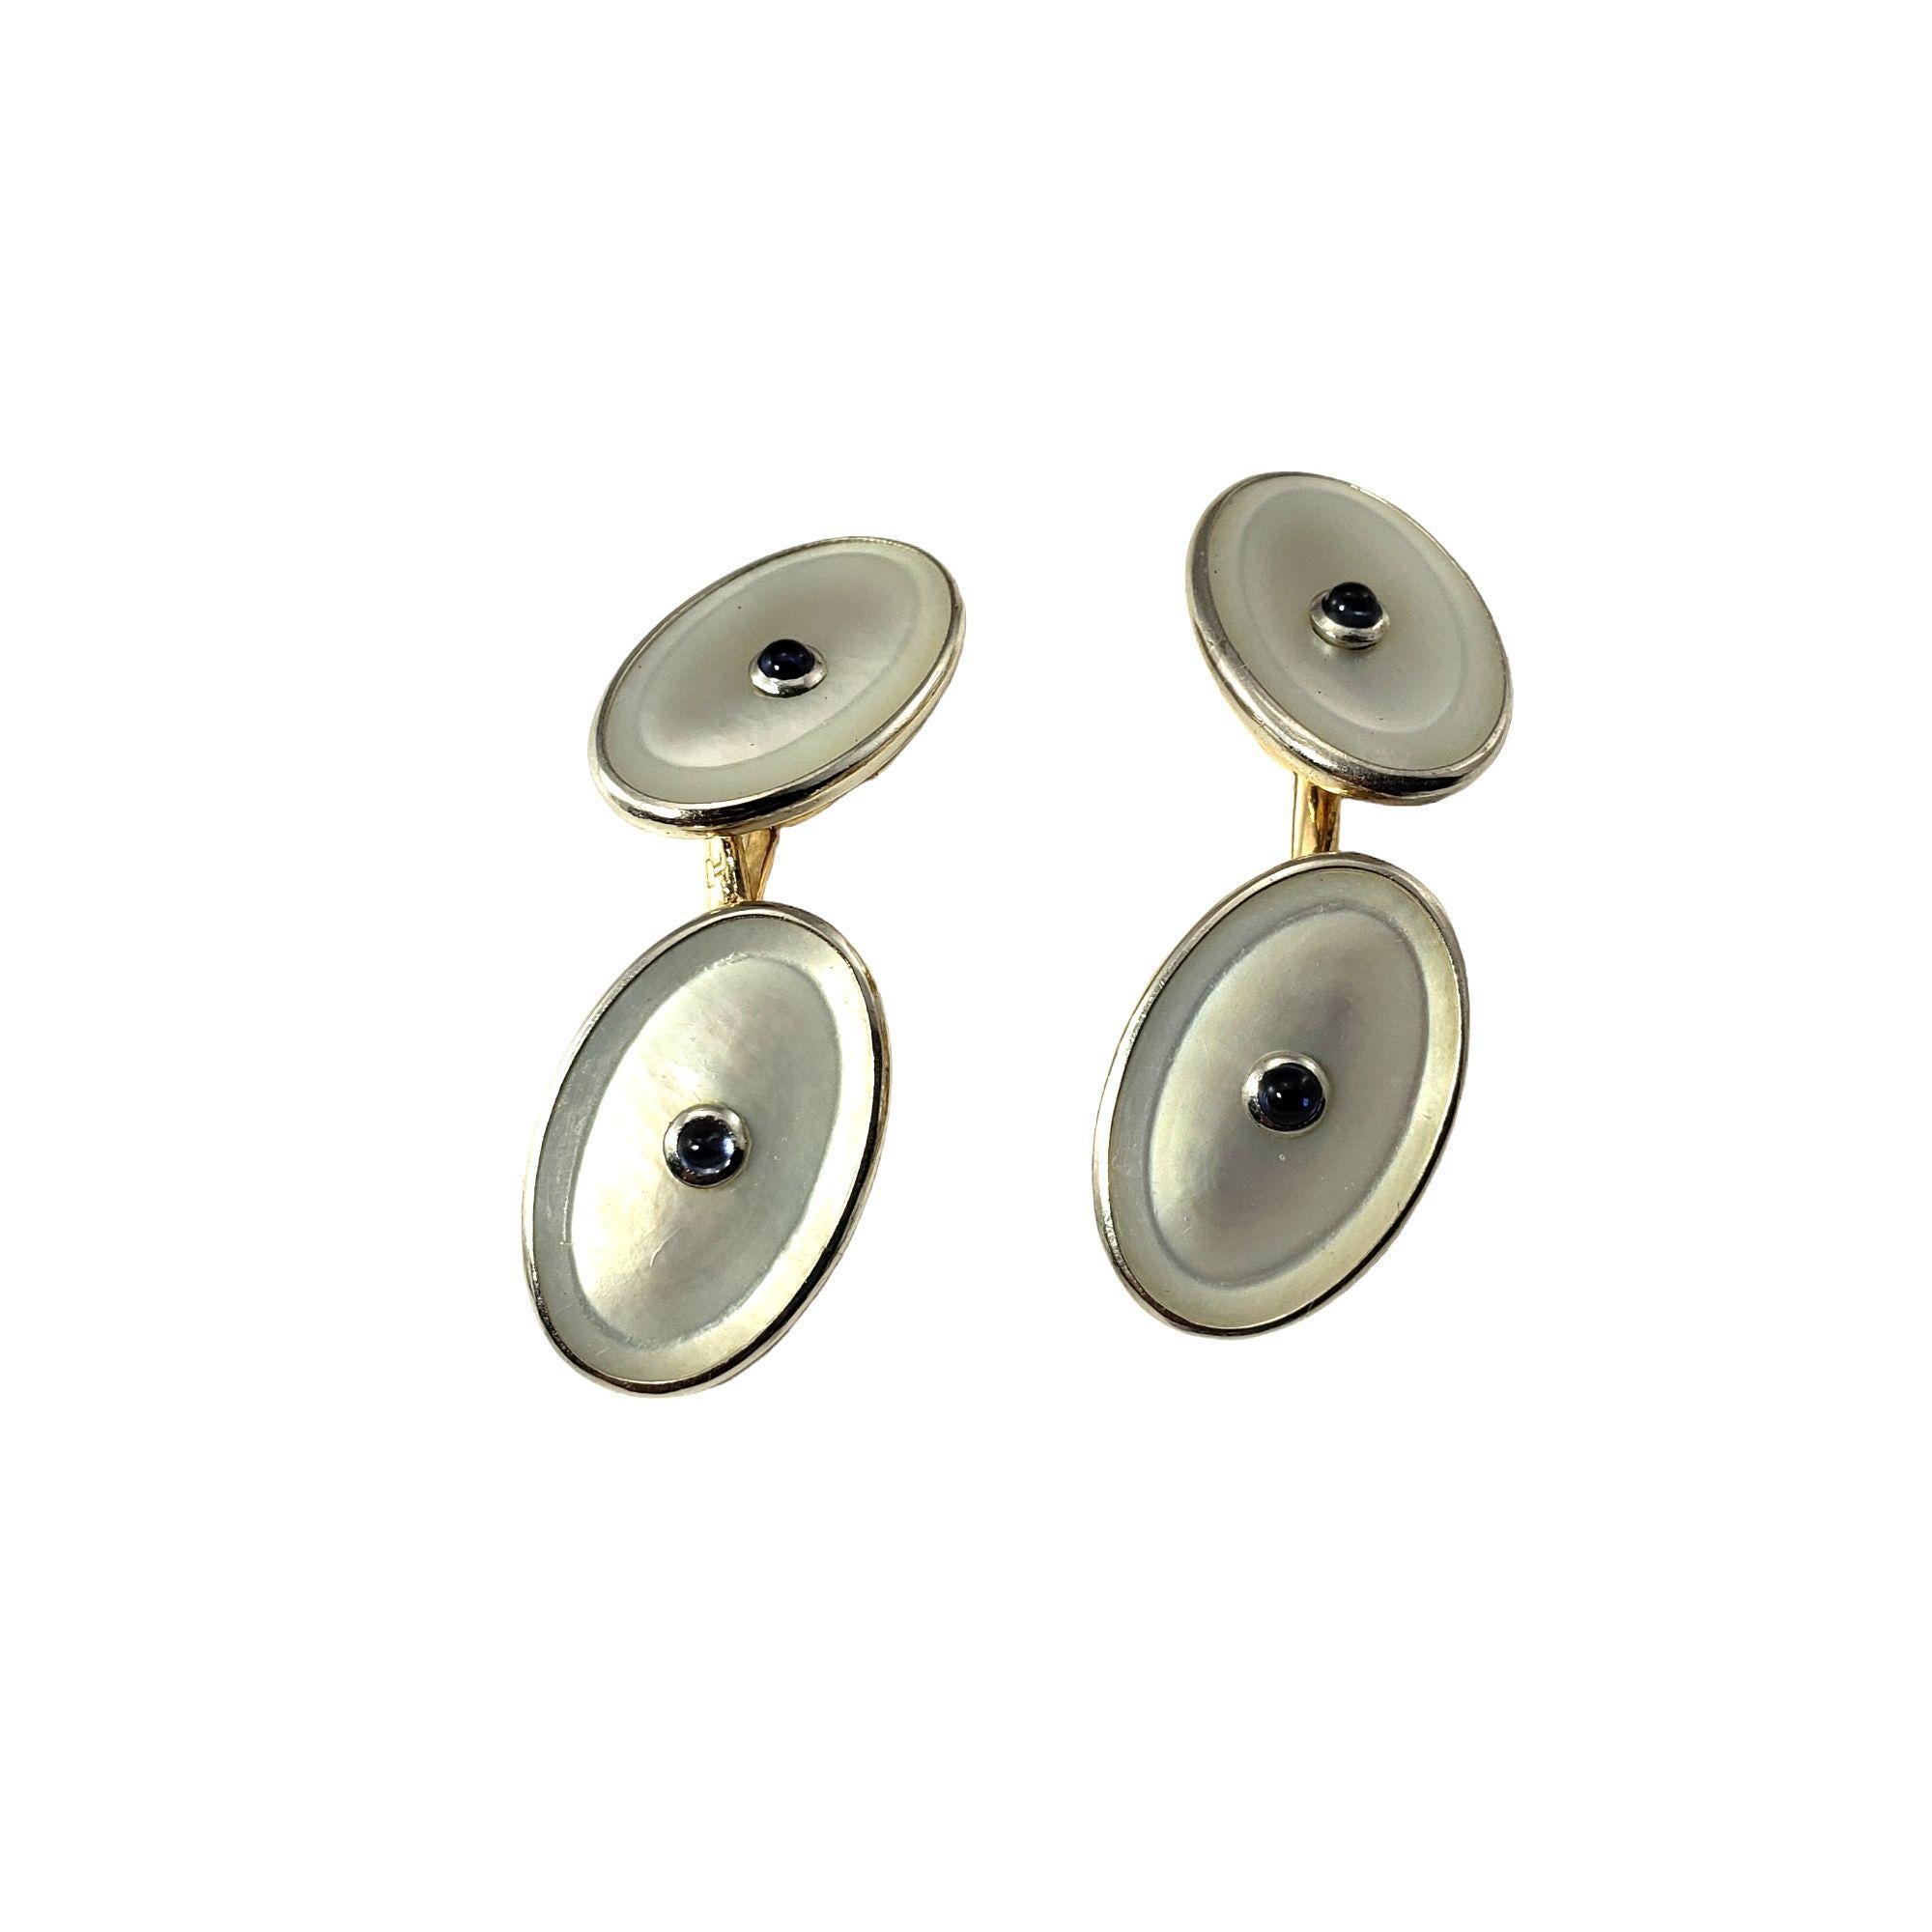 14 Karat Yellow Gold Mother of Pearl and Sapphire Cufflinks-

These elegant cufflinks are created in beautifully detailed mother of pearl set in 14K yellow folder. Accented with two cabochon sapphires. 

Size: 18 mm x 12 mm

Weight: 5.7 dwt. / 8.8